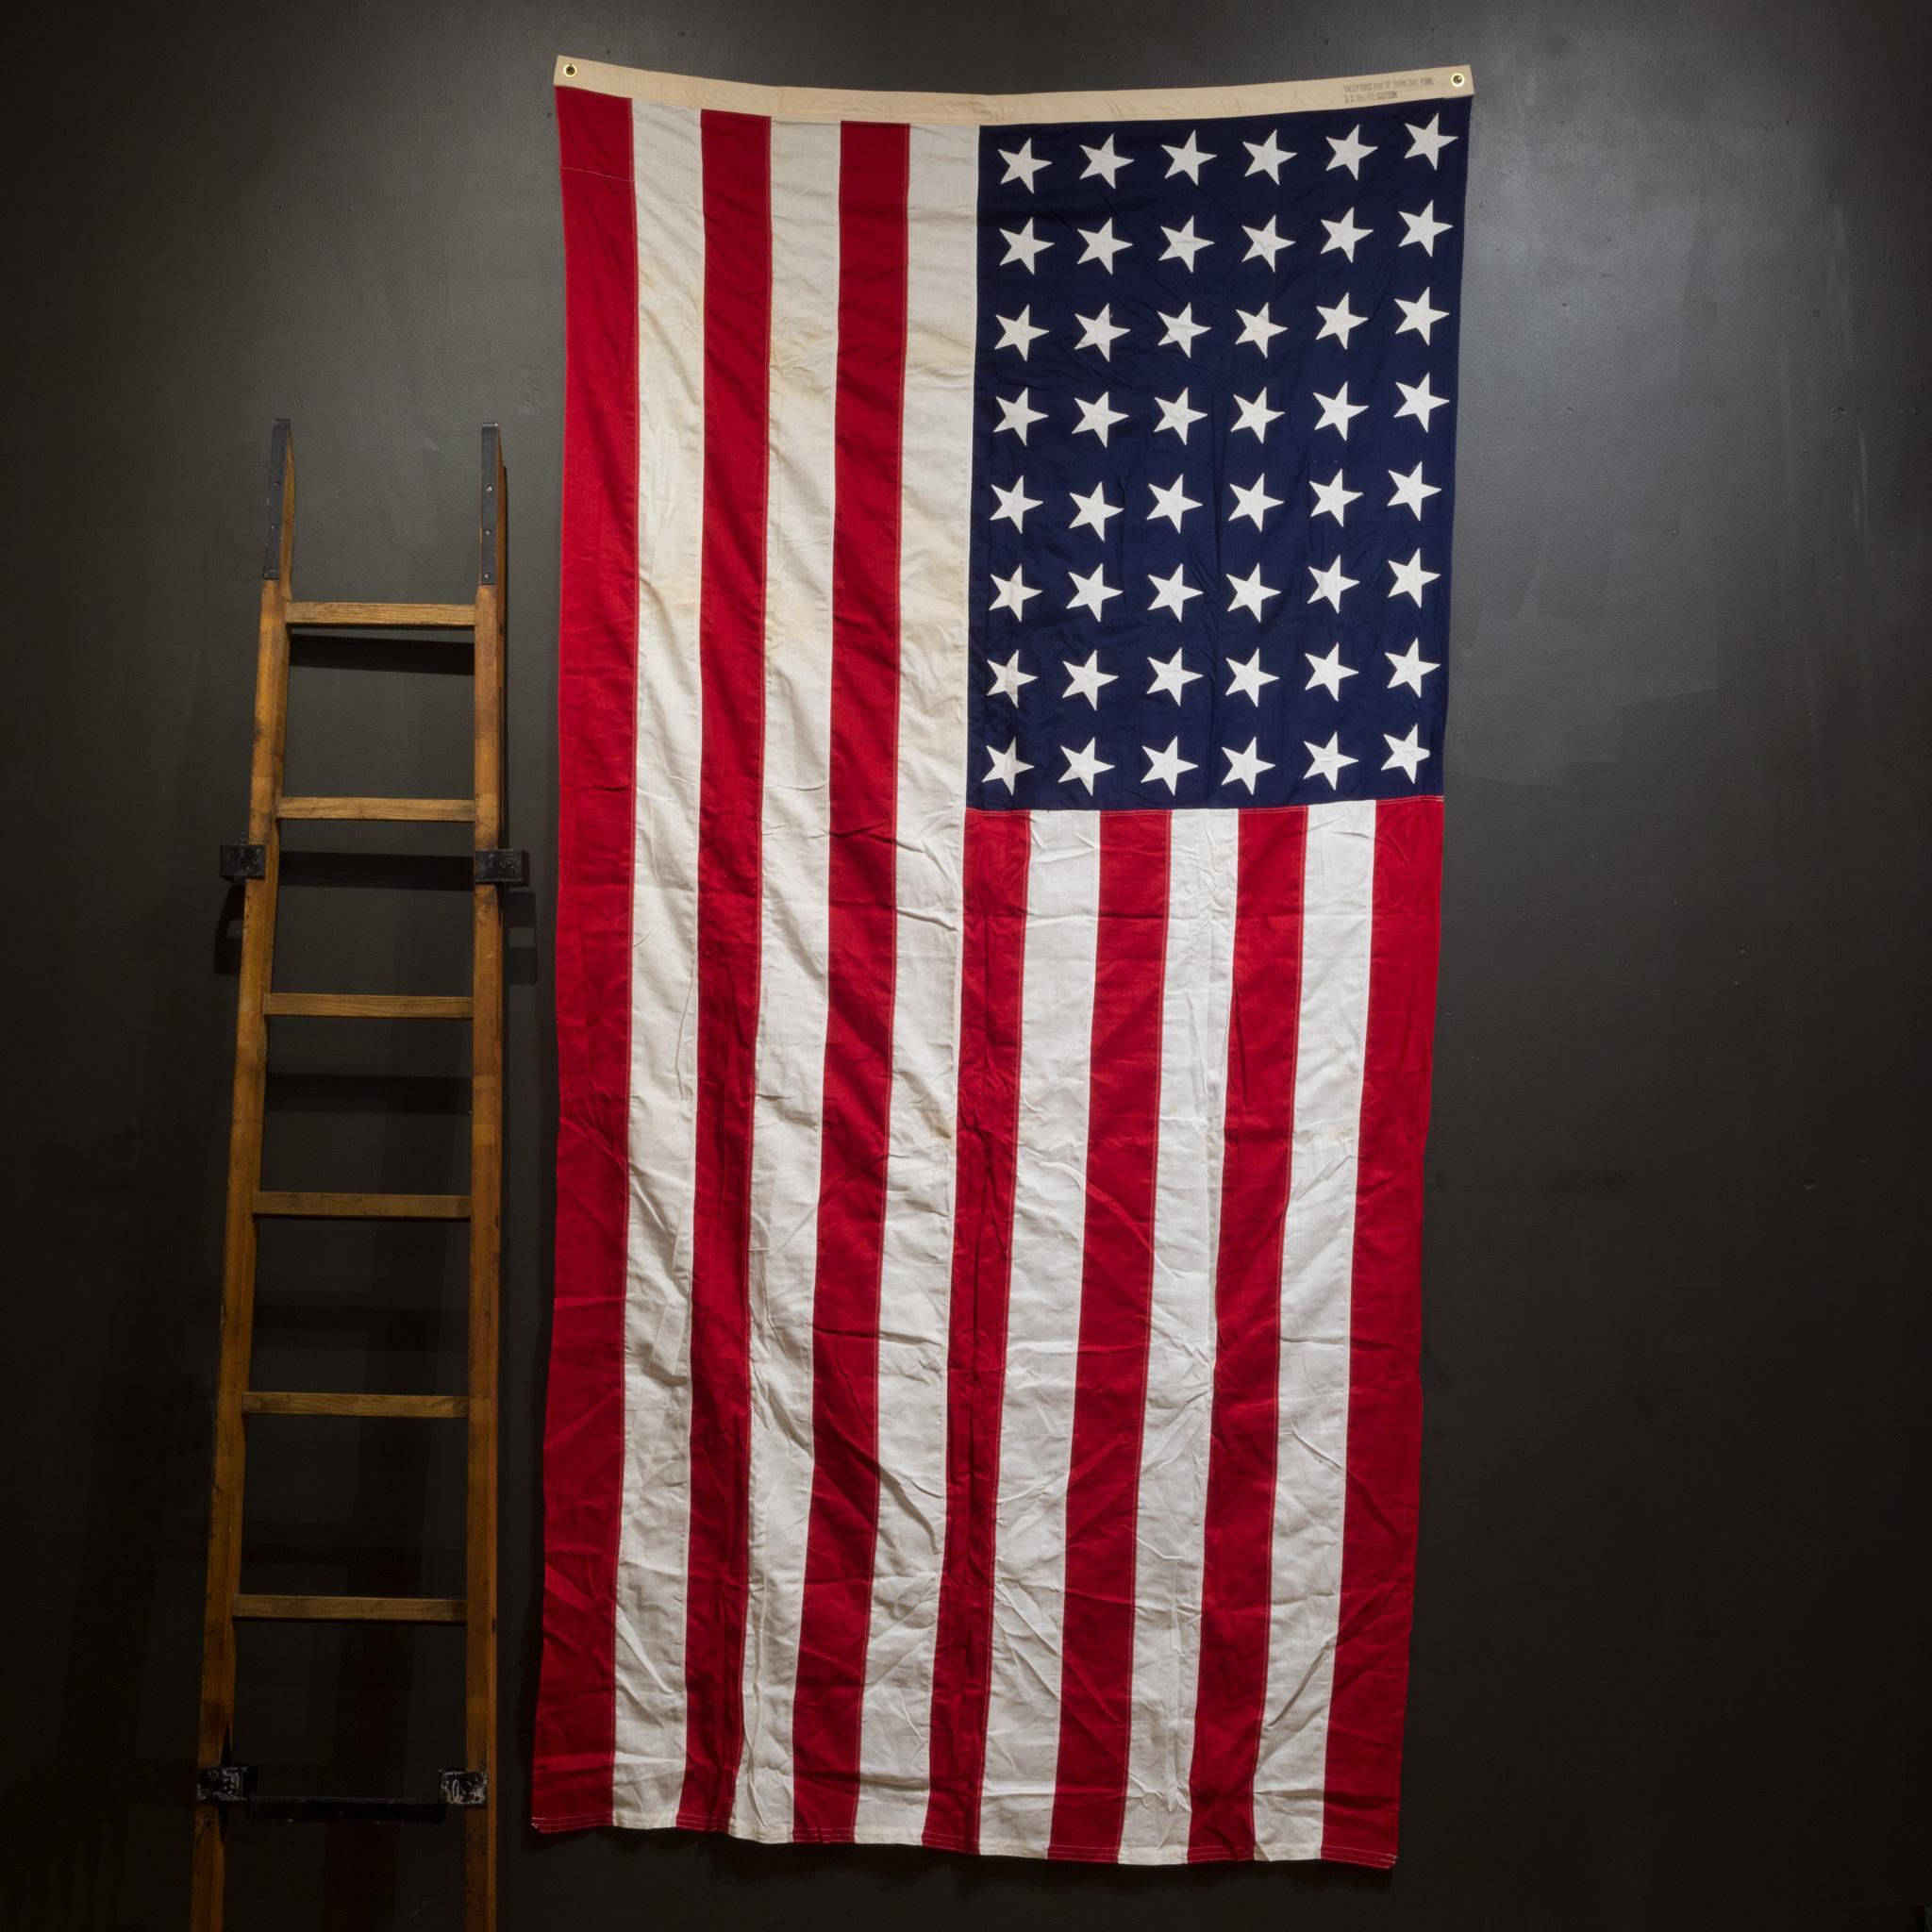 About

This is an original monumental American flag made by Valley Forge Co. with 48 stars and stripes and brass grommets.

Creator Valley Forge Co.
Date of manufacture c.1940-1950.
Materials and techniques cotton, metal.
Condition good. Wear